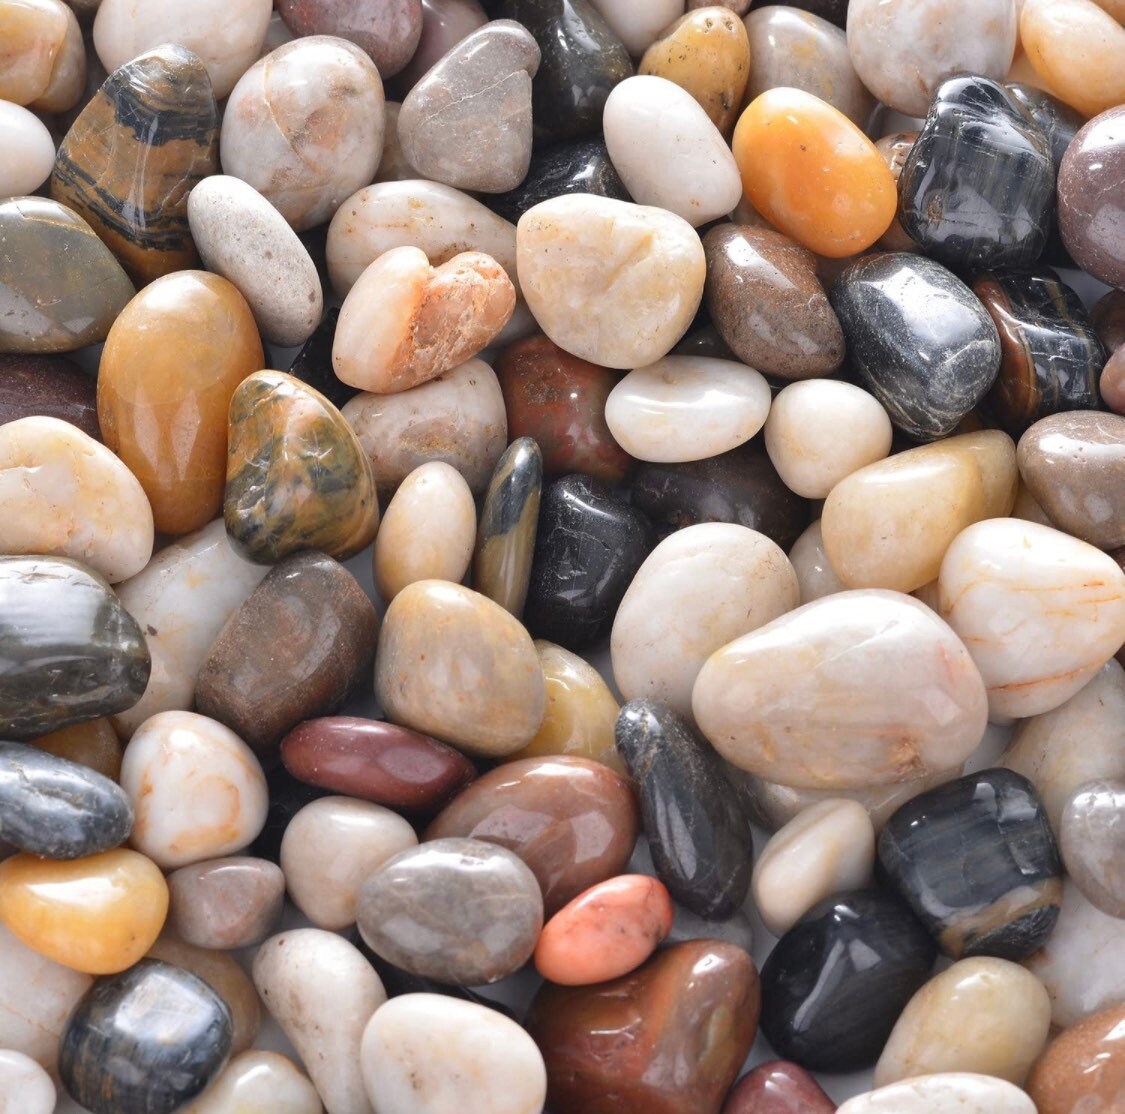 Pebbles - Garden Stones - 1lb smooth polished River stones for crafts, plants, and tanks!